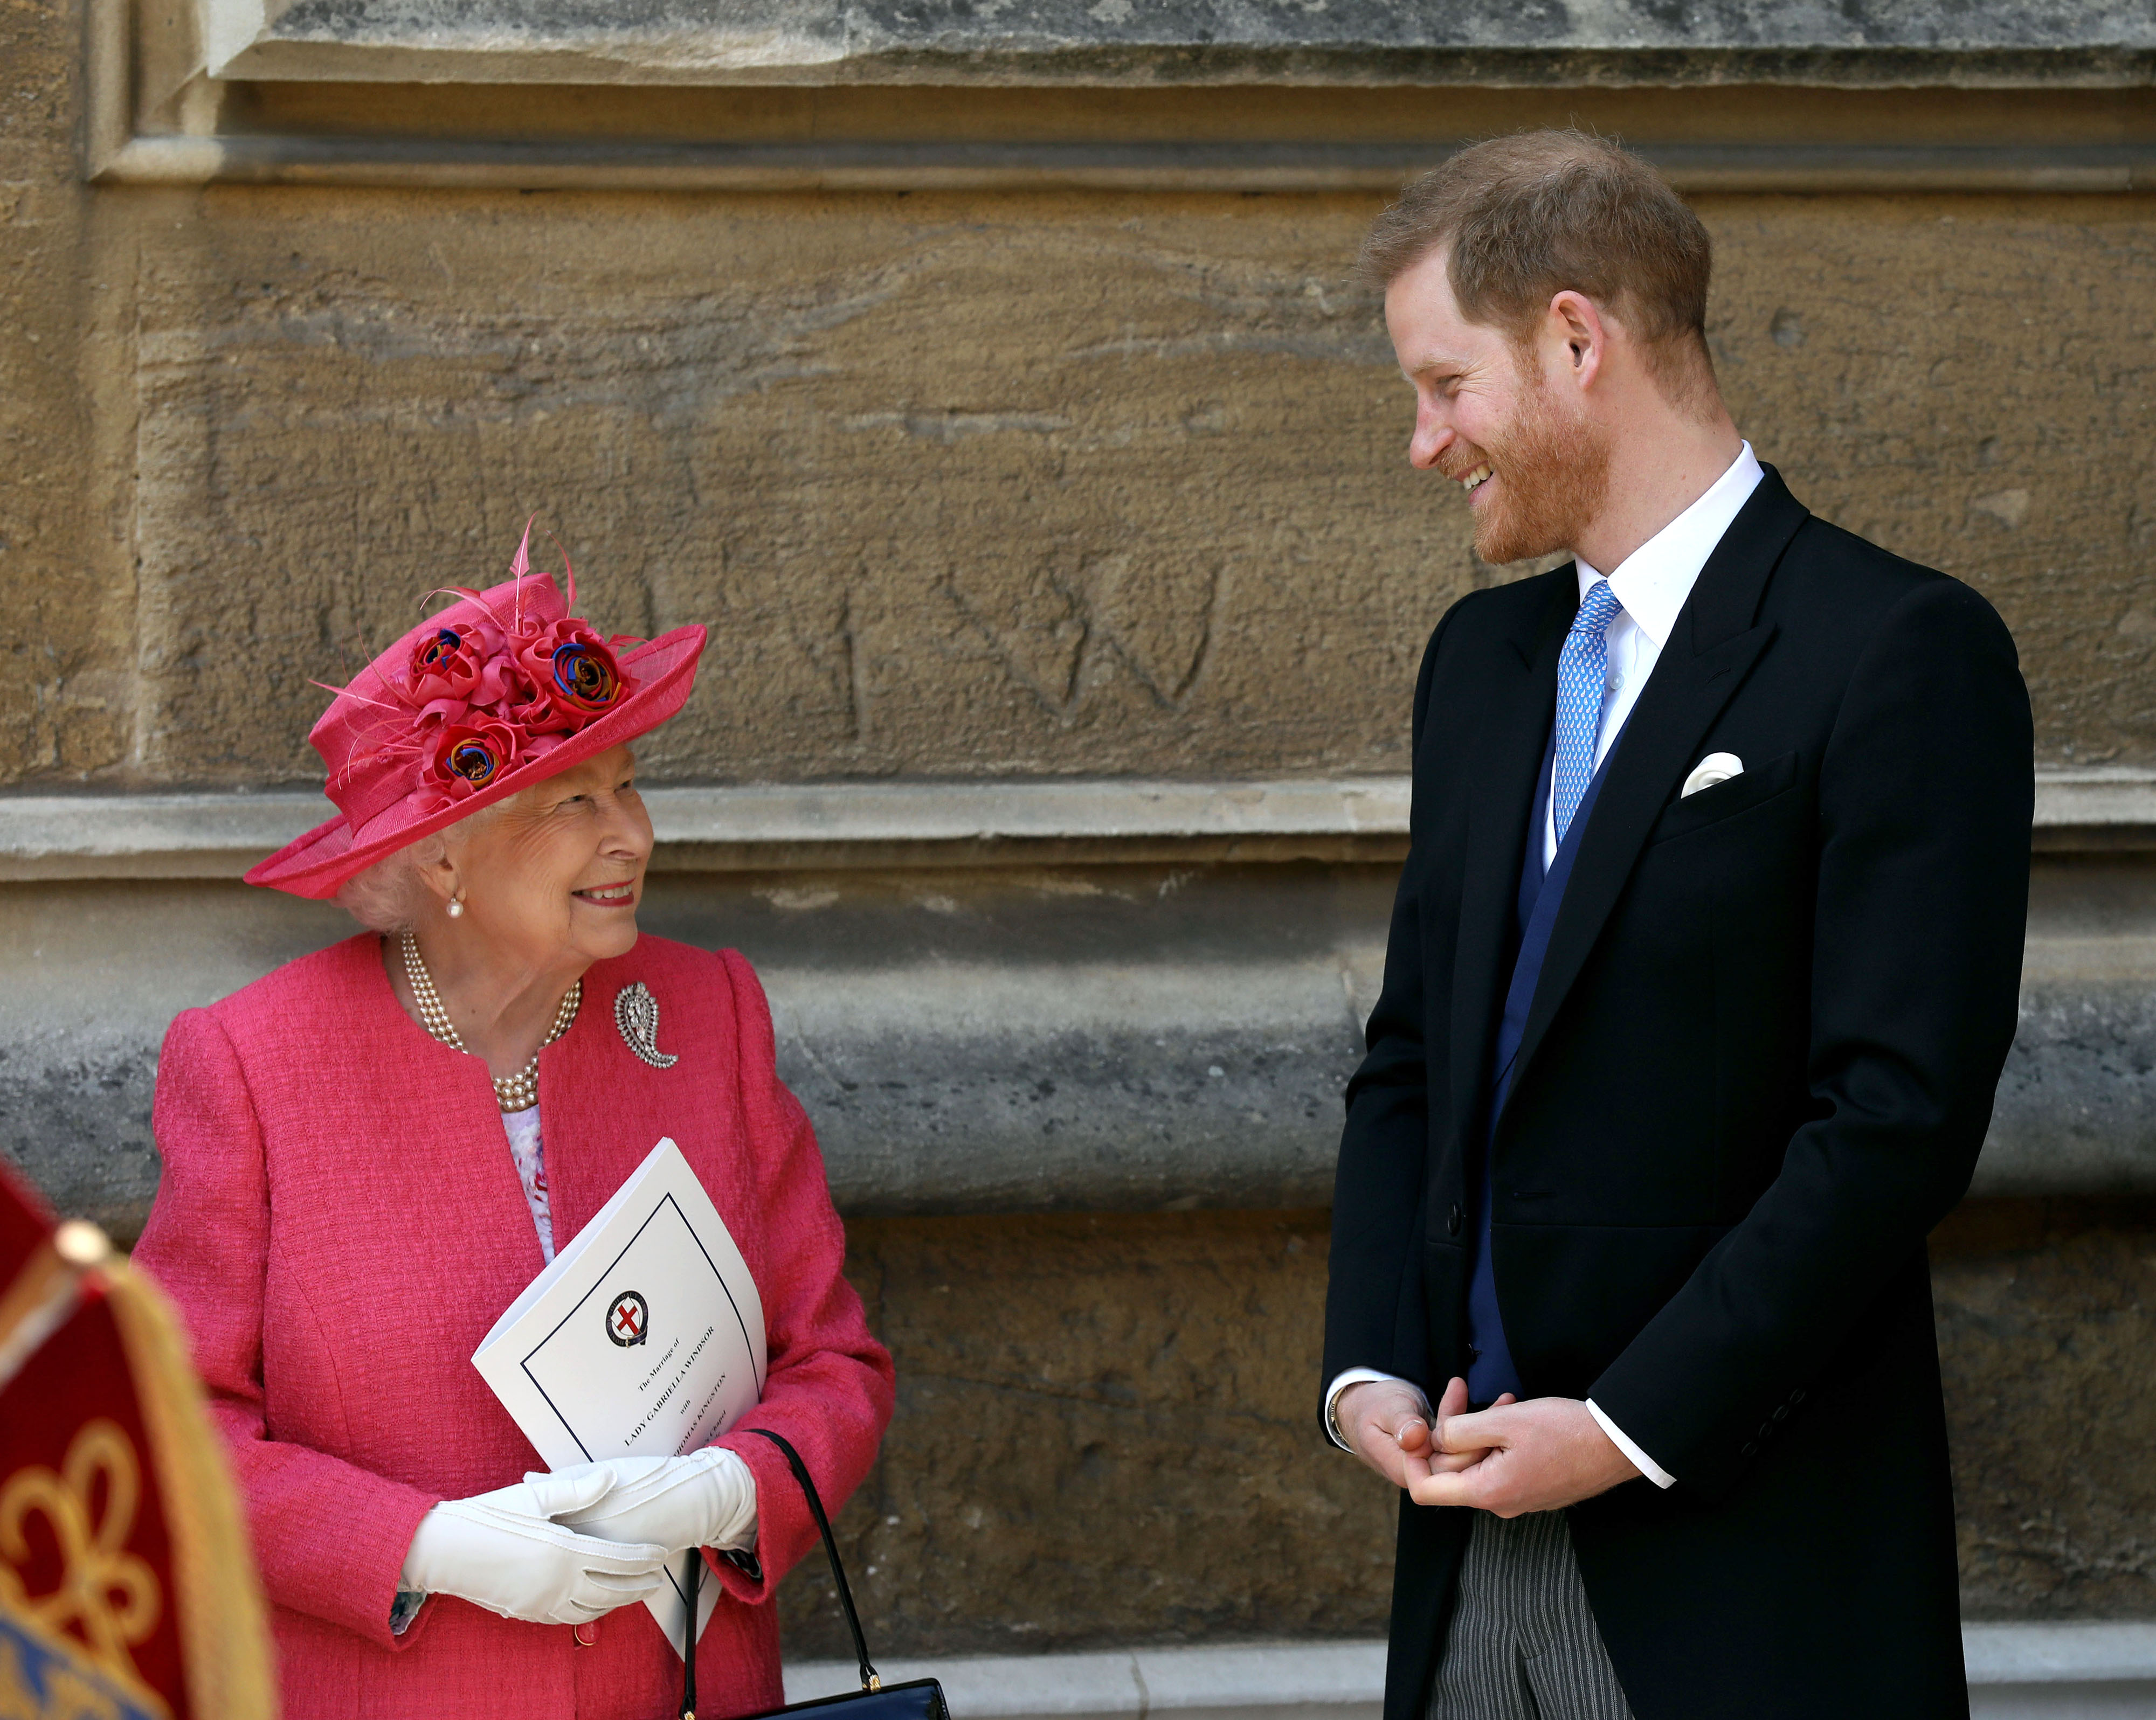 Queen Elizabeth II speaks with Prince Harry as they leave after the wedding of Lady Gabriella Windsor